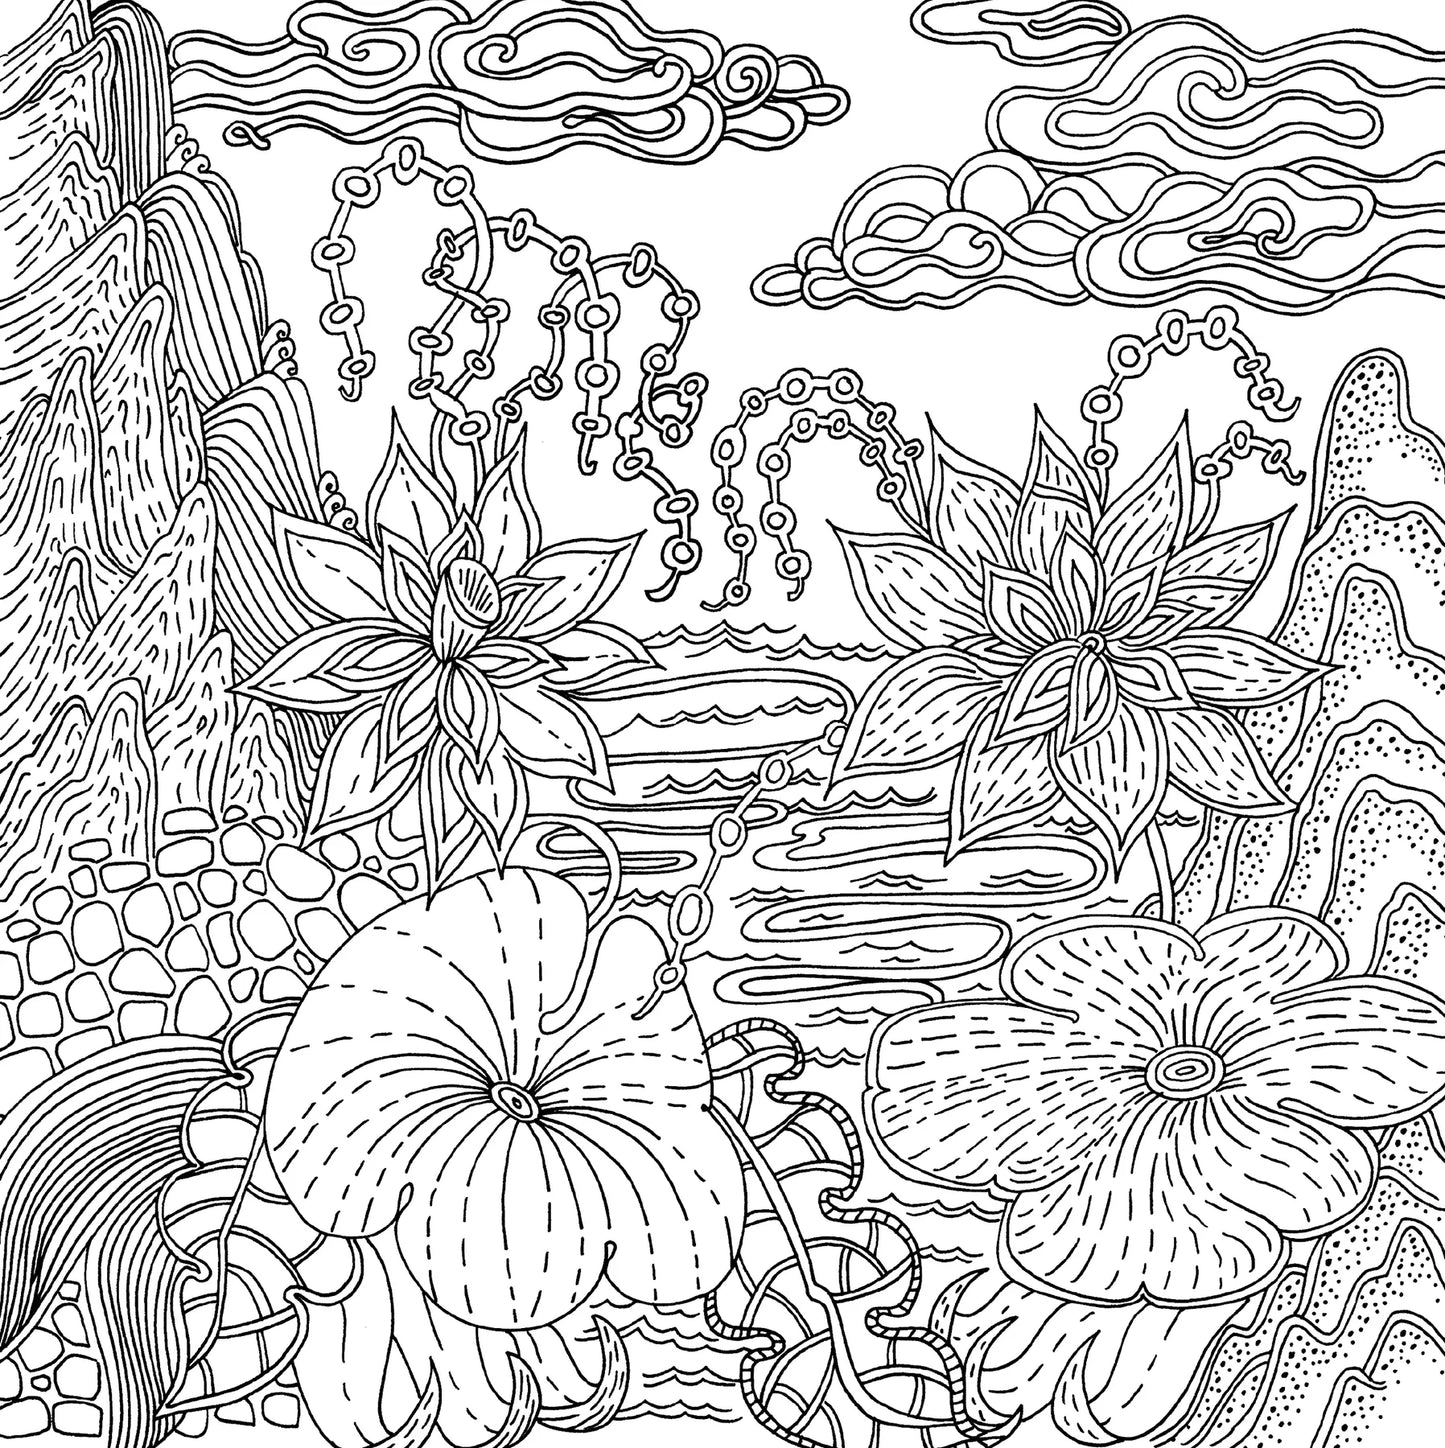 Colouring Book | ADULT-SERENITY #320070-2